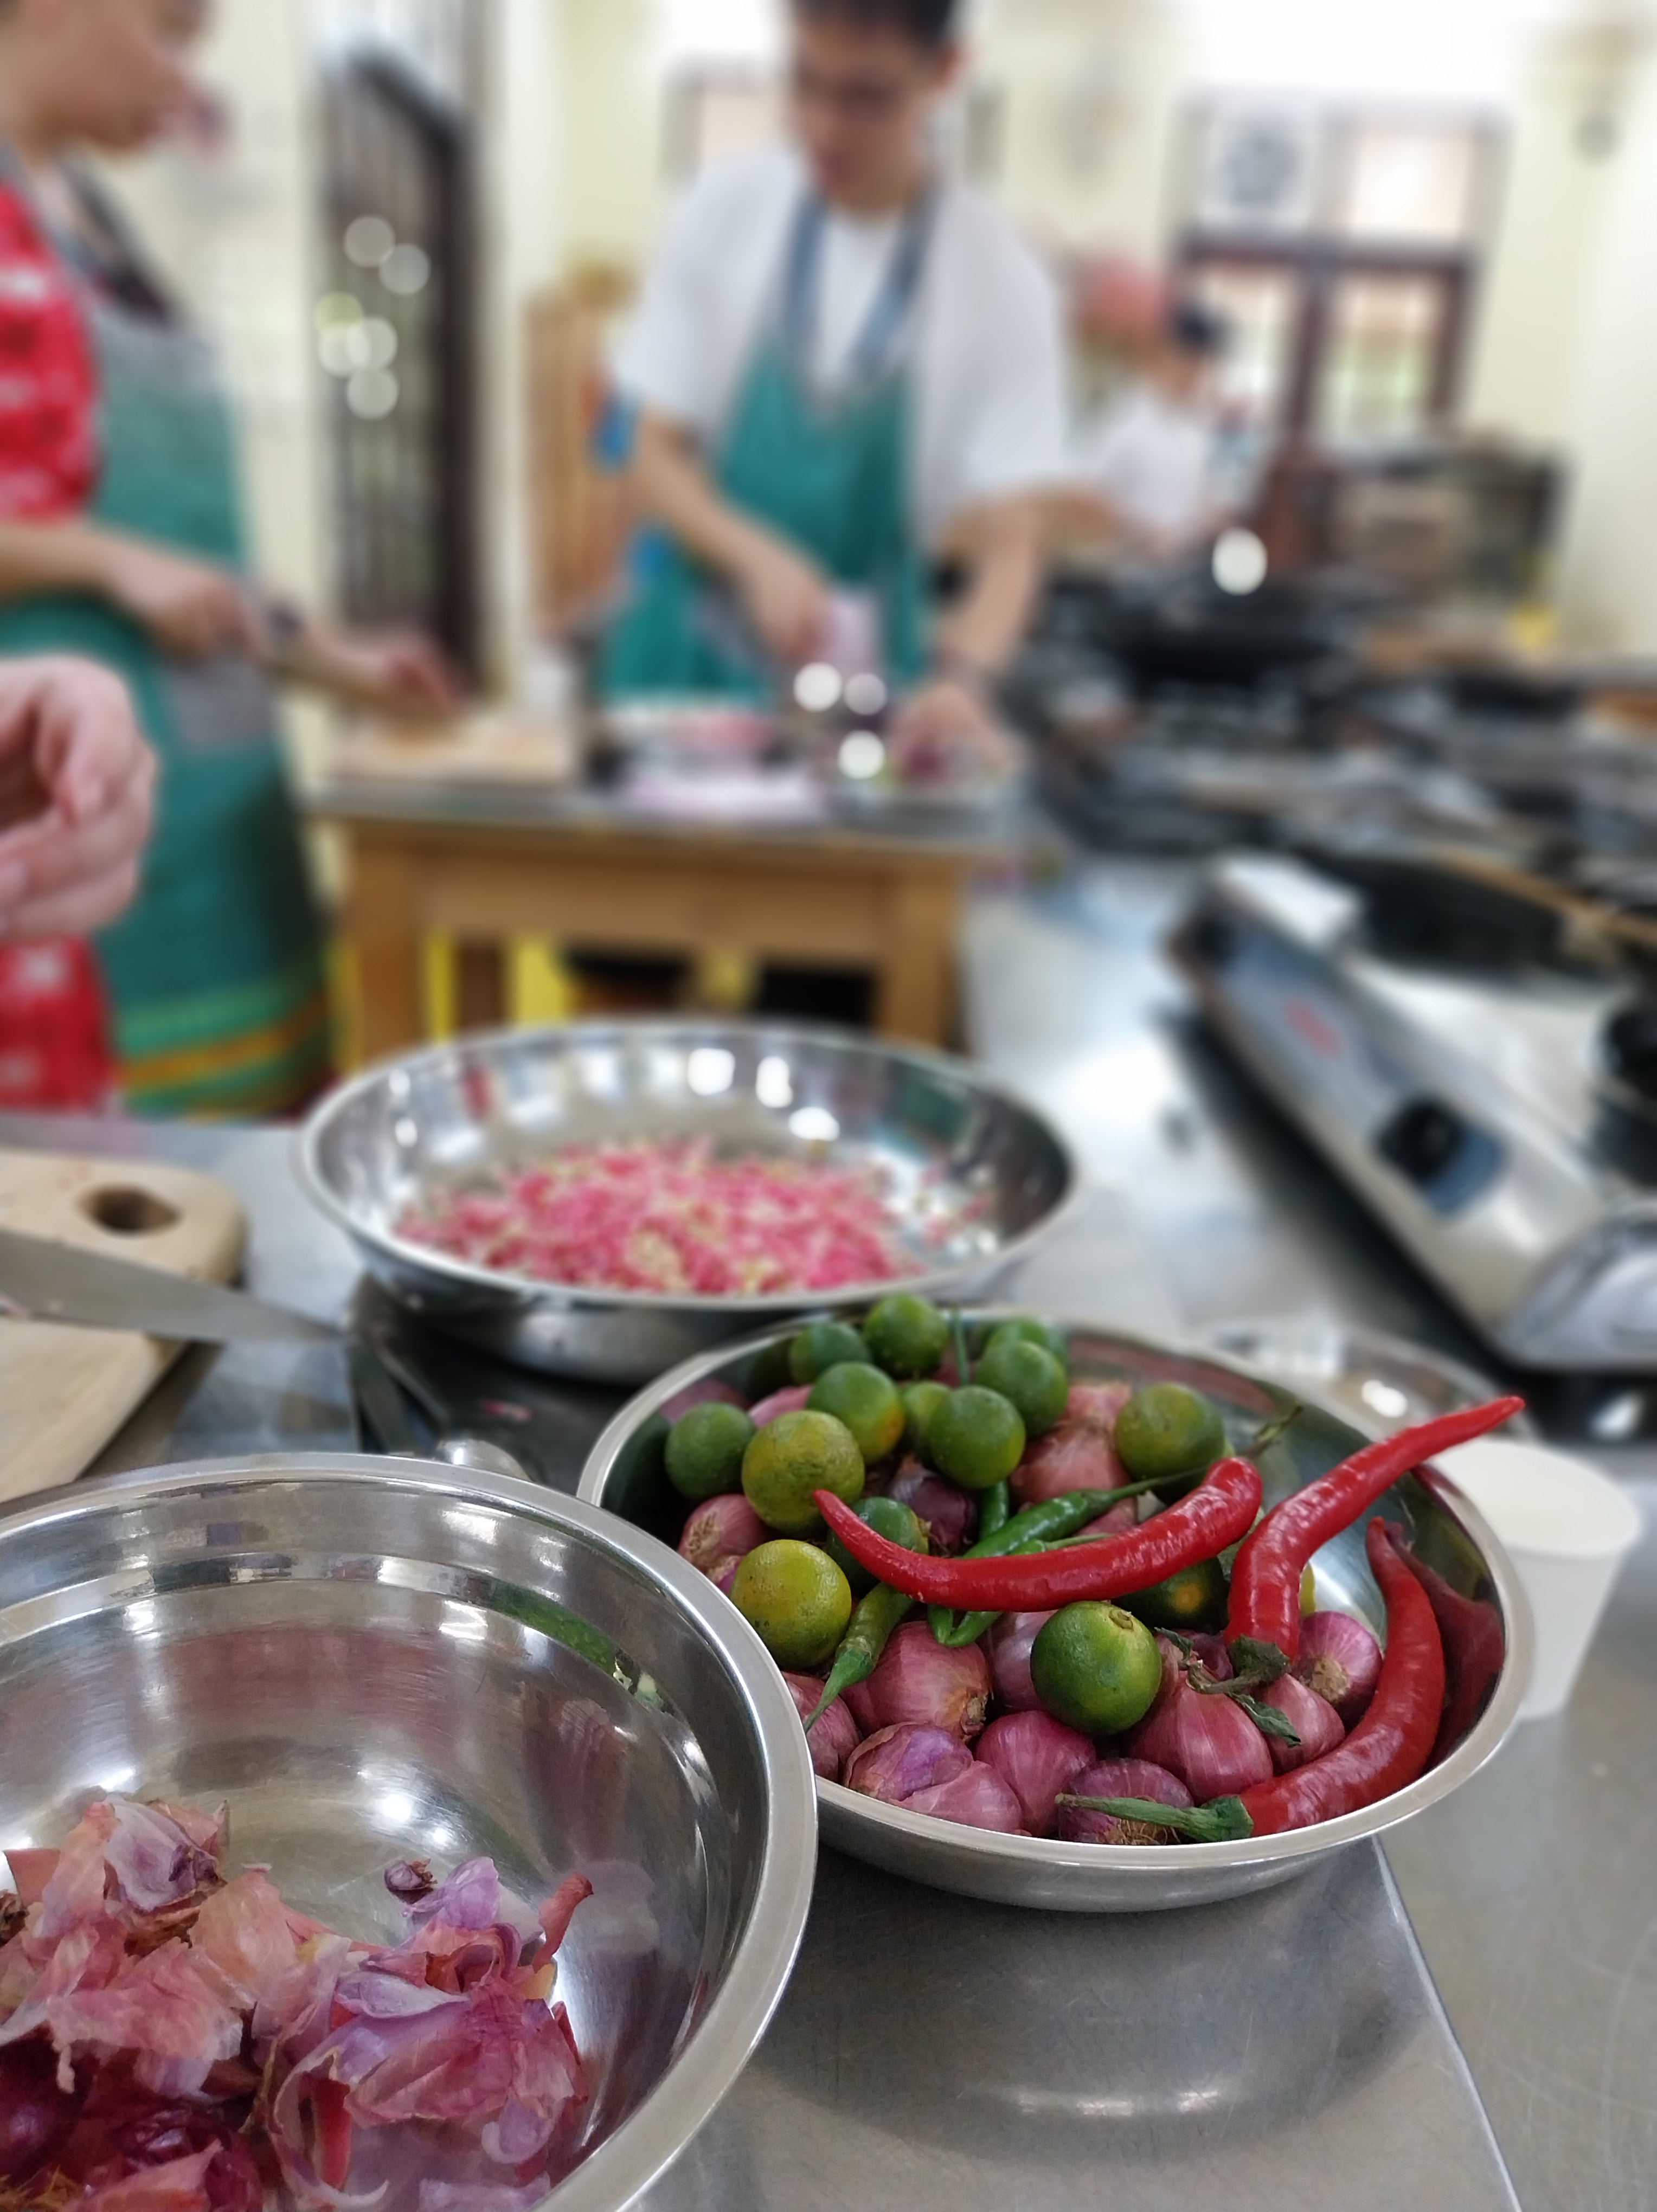 learning how to cook at Tropical spice garden in Penang